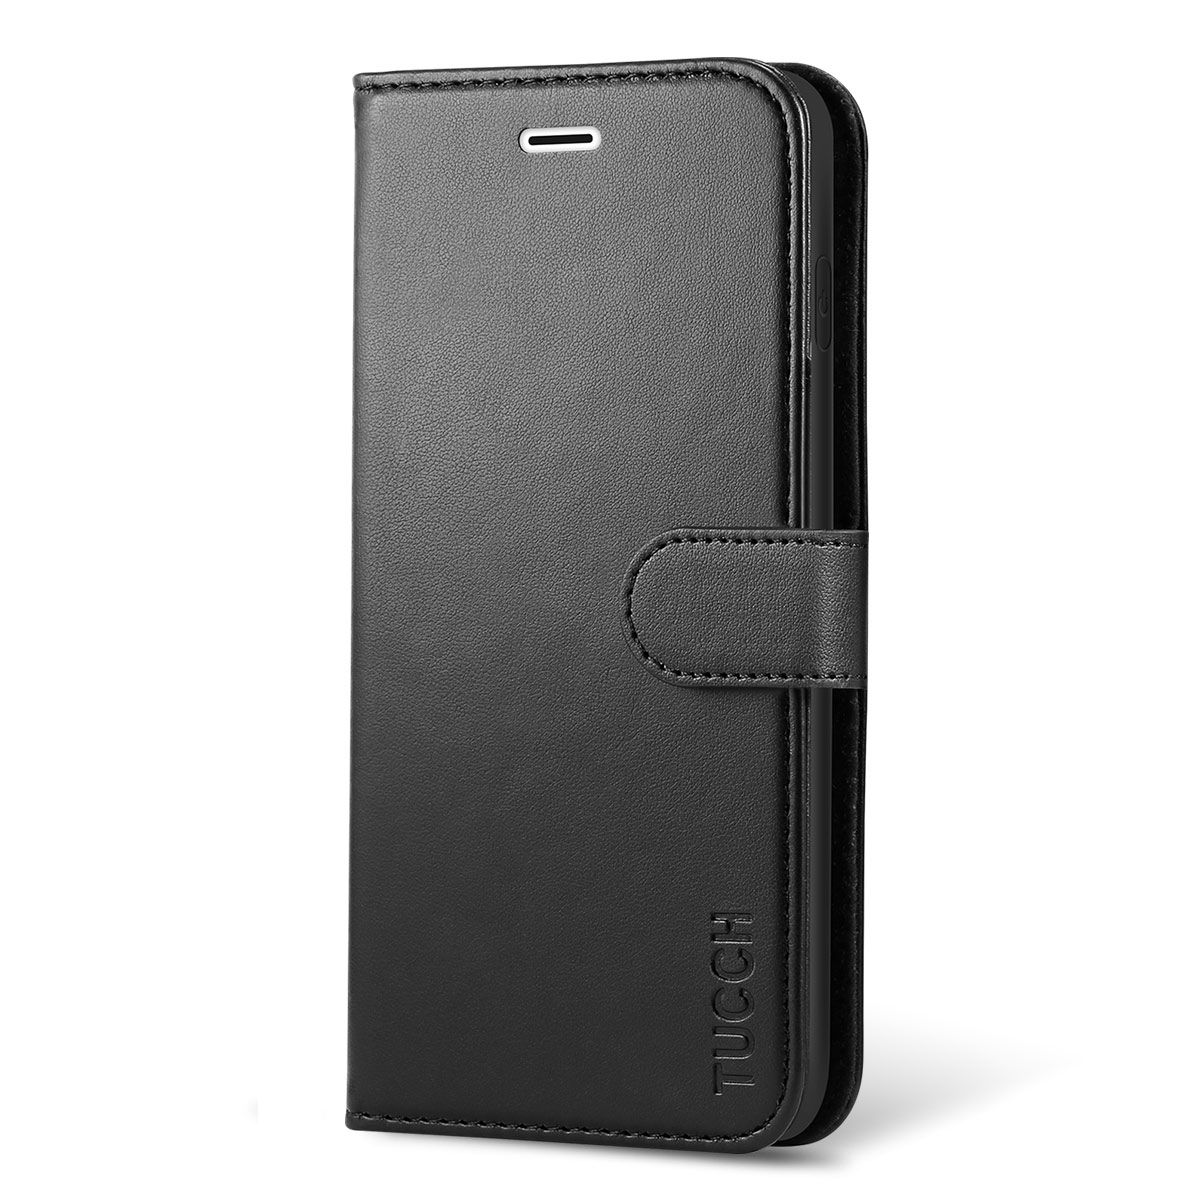 Nadoli for iPhone 8 Plus/7 Plus Wallet Case,Ultra Slim Folio Protective PU Leather Flip Case with 360 Ring Holder Kickstand Card Slot Clear Soft TPU Back Cover for iPhone 8 Plus/7 Plus